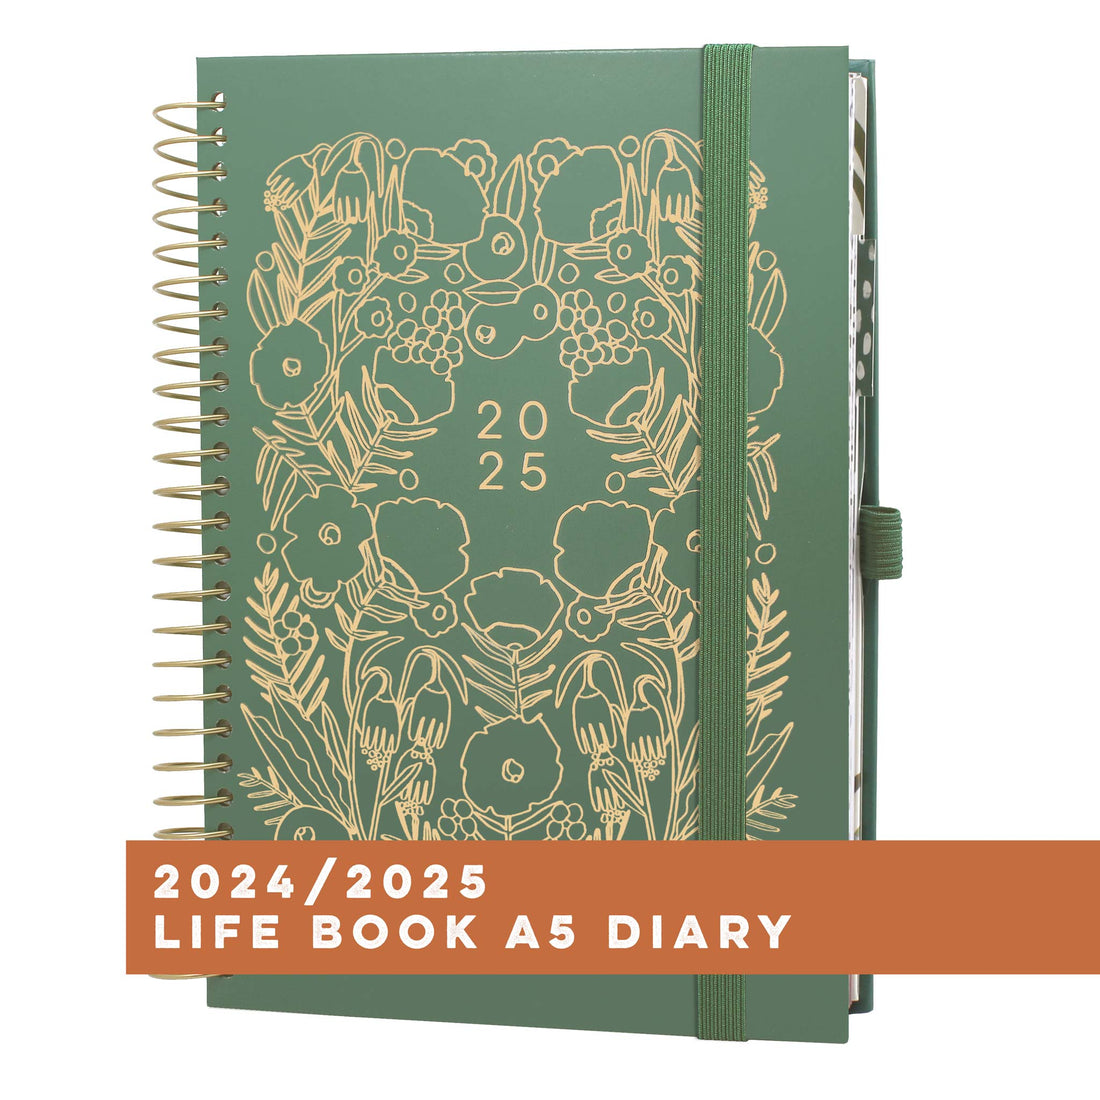 Boxclever Press Life Book Diary 2024/2025 with a green floral design